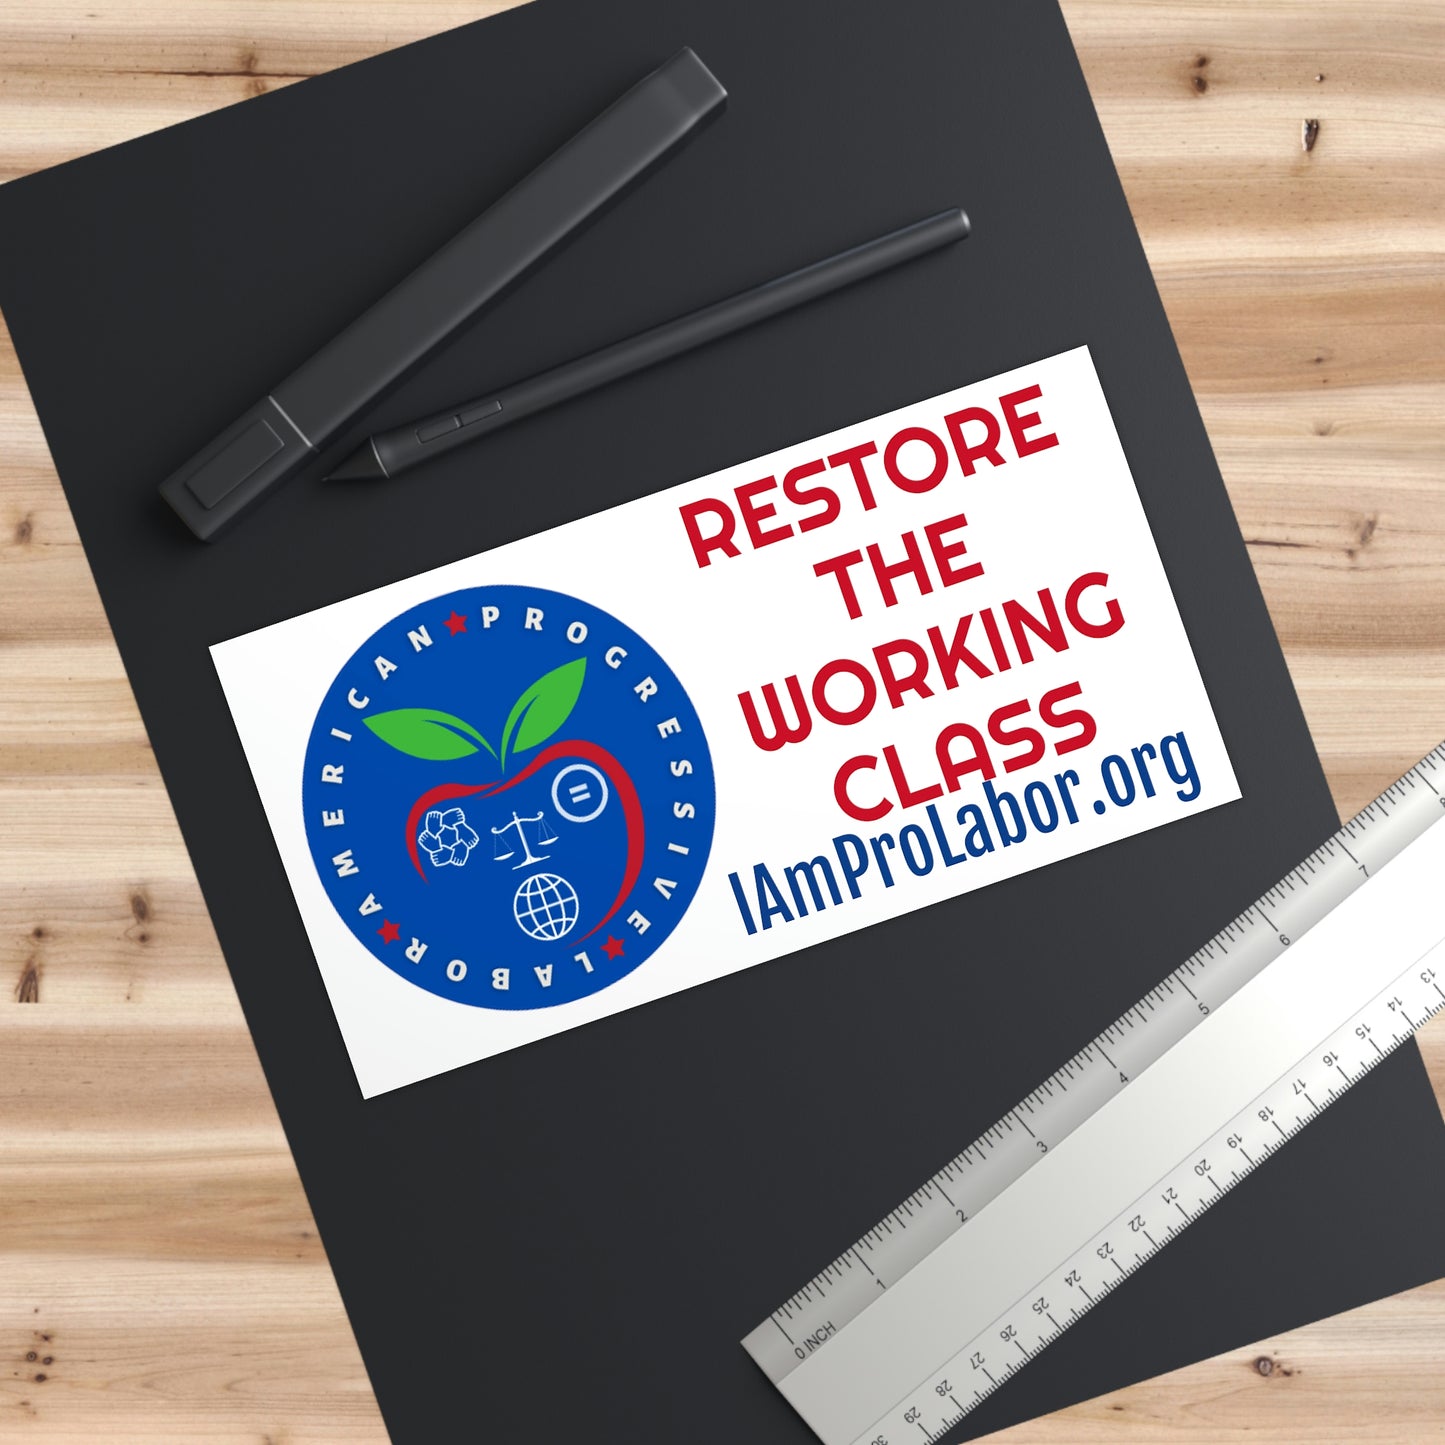 Restore The Working Class (APL Party Logo) Bumper Stickers